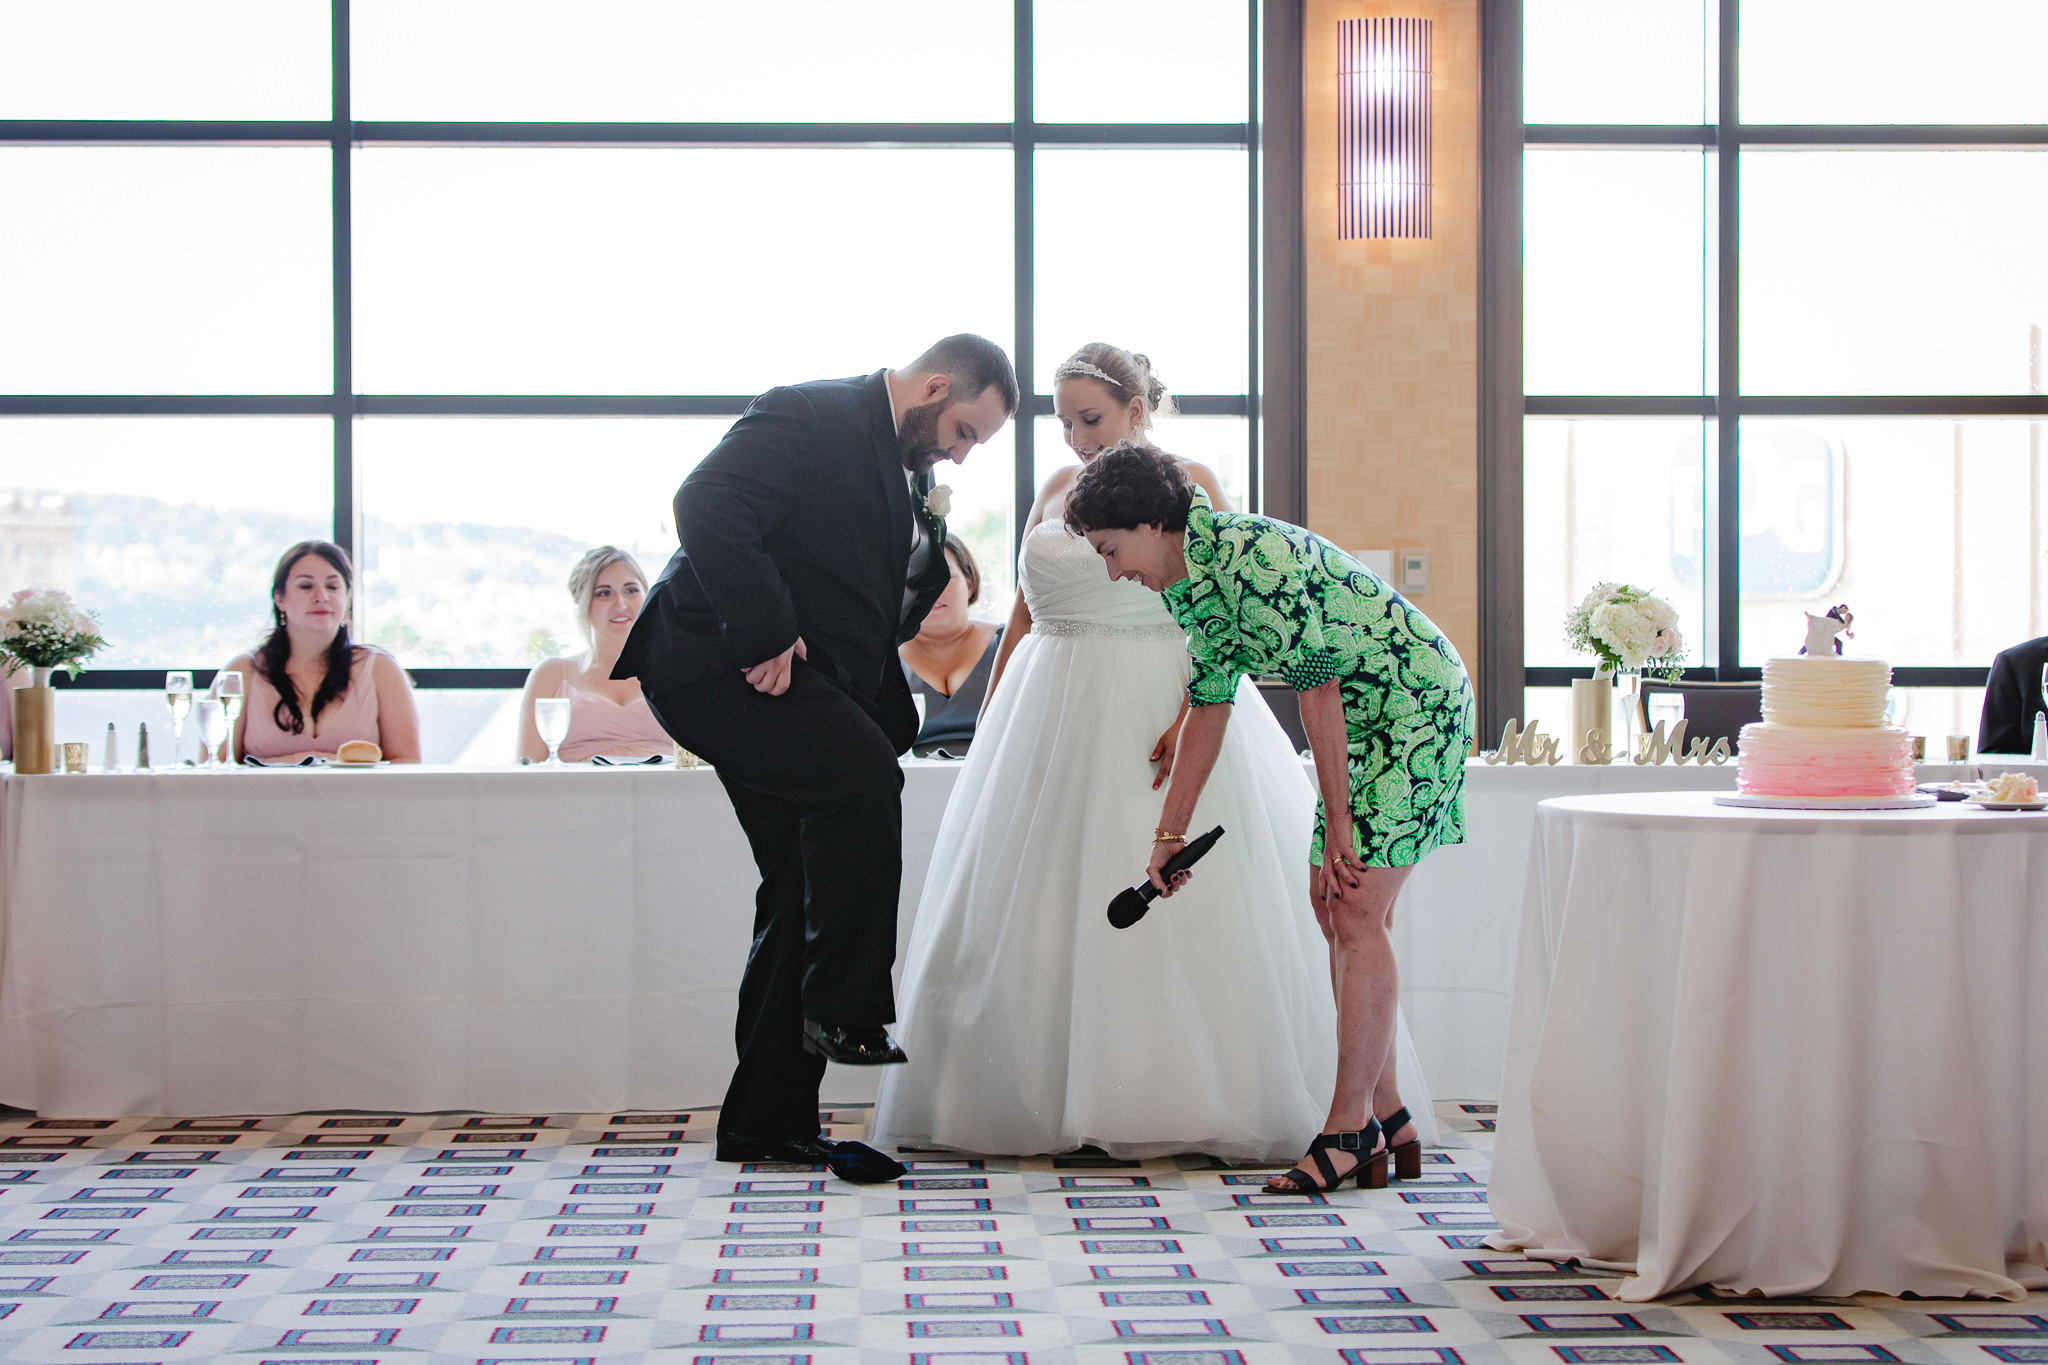 Groom breaks the glass to honor his Jewish heritage at his Duquesne University wedding